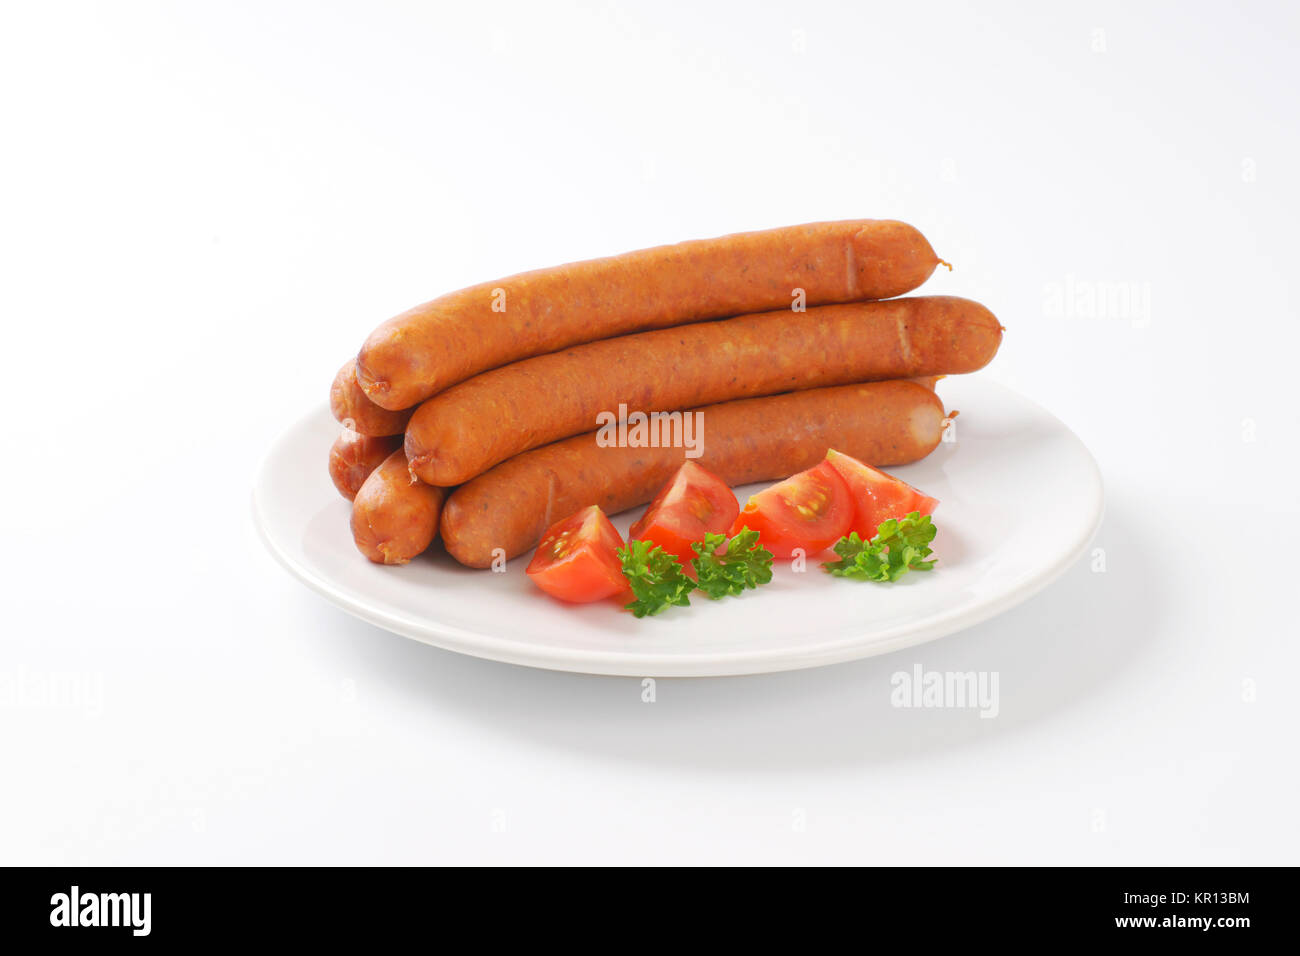 long thin sausages Stock Photo - Alamy